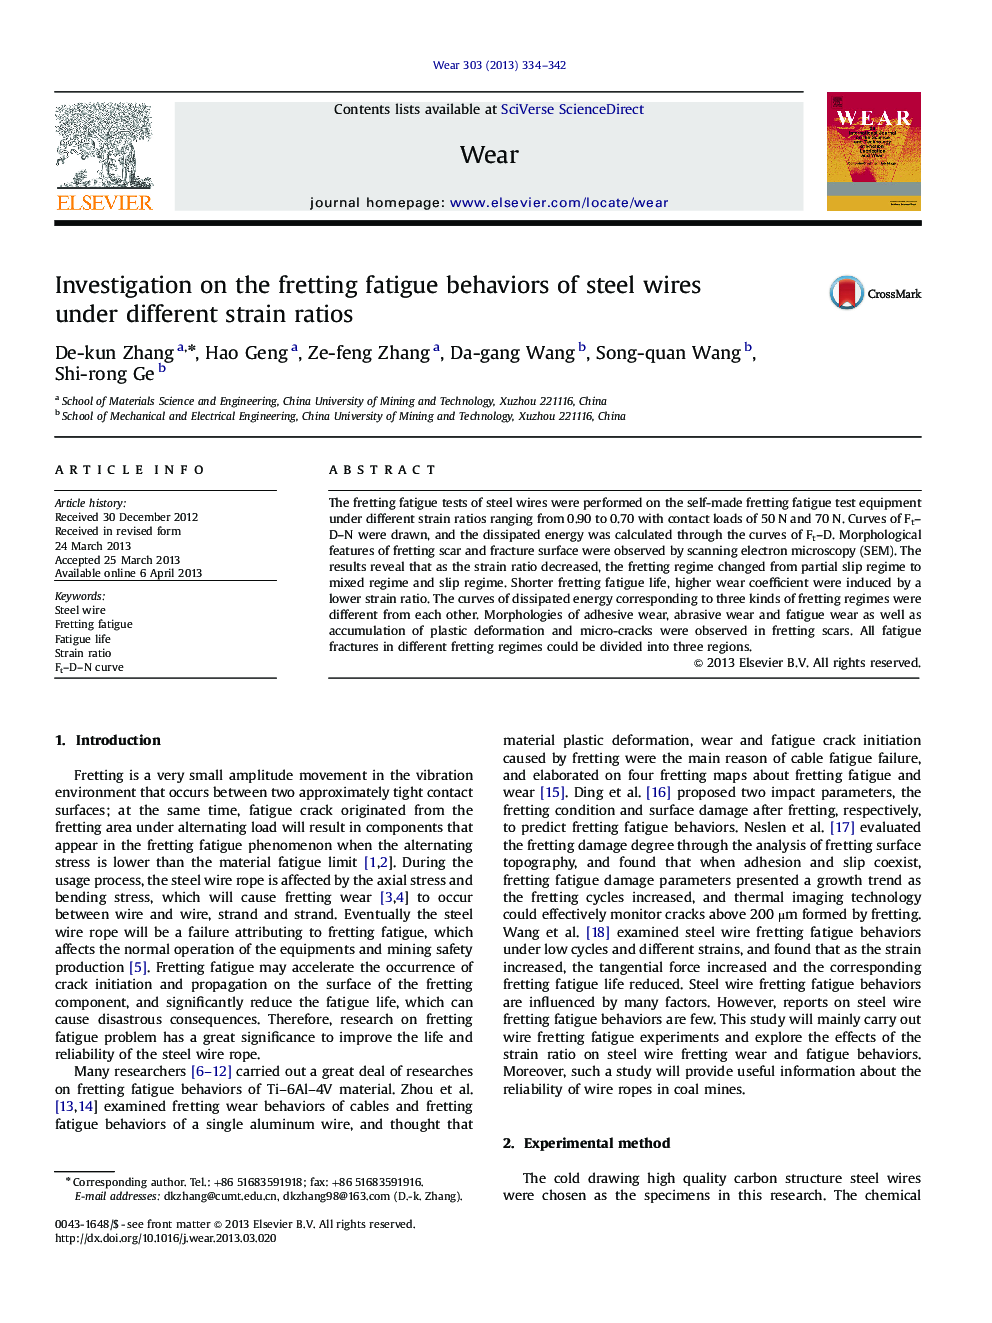 Investigation on the fretting fatigue behaviors of steel wires under different strain ratios